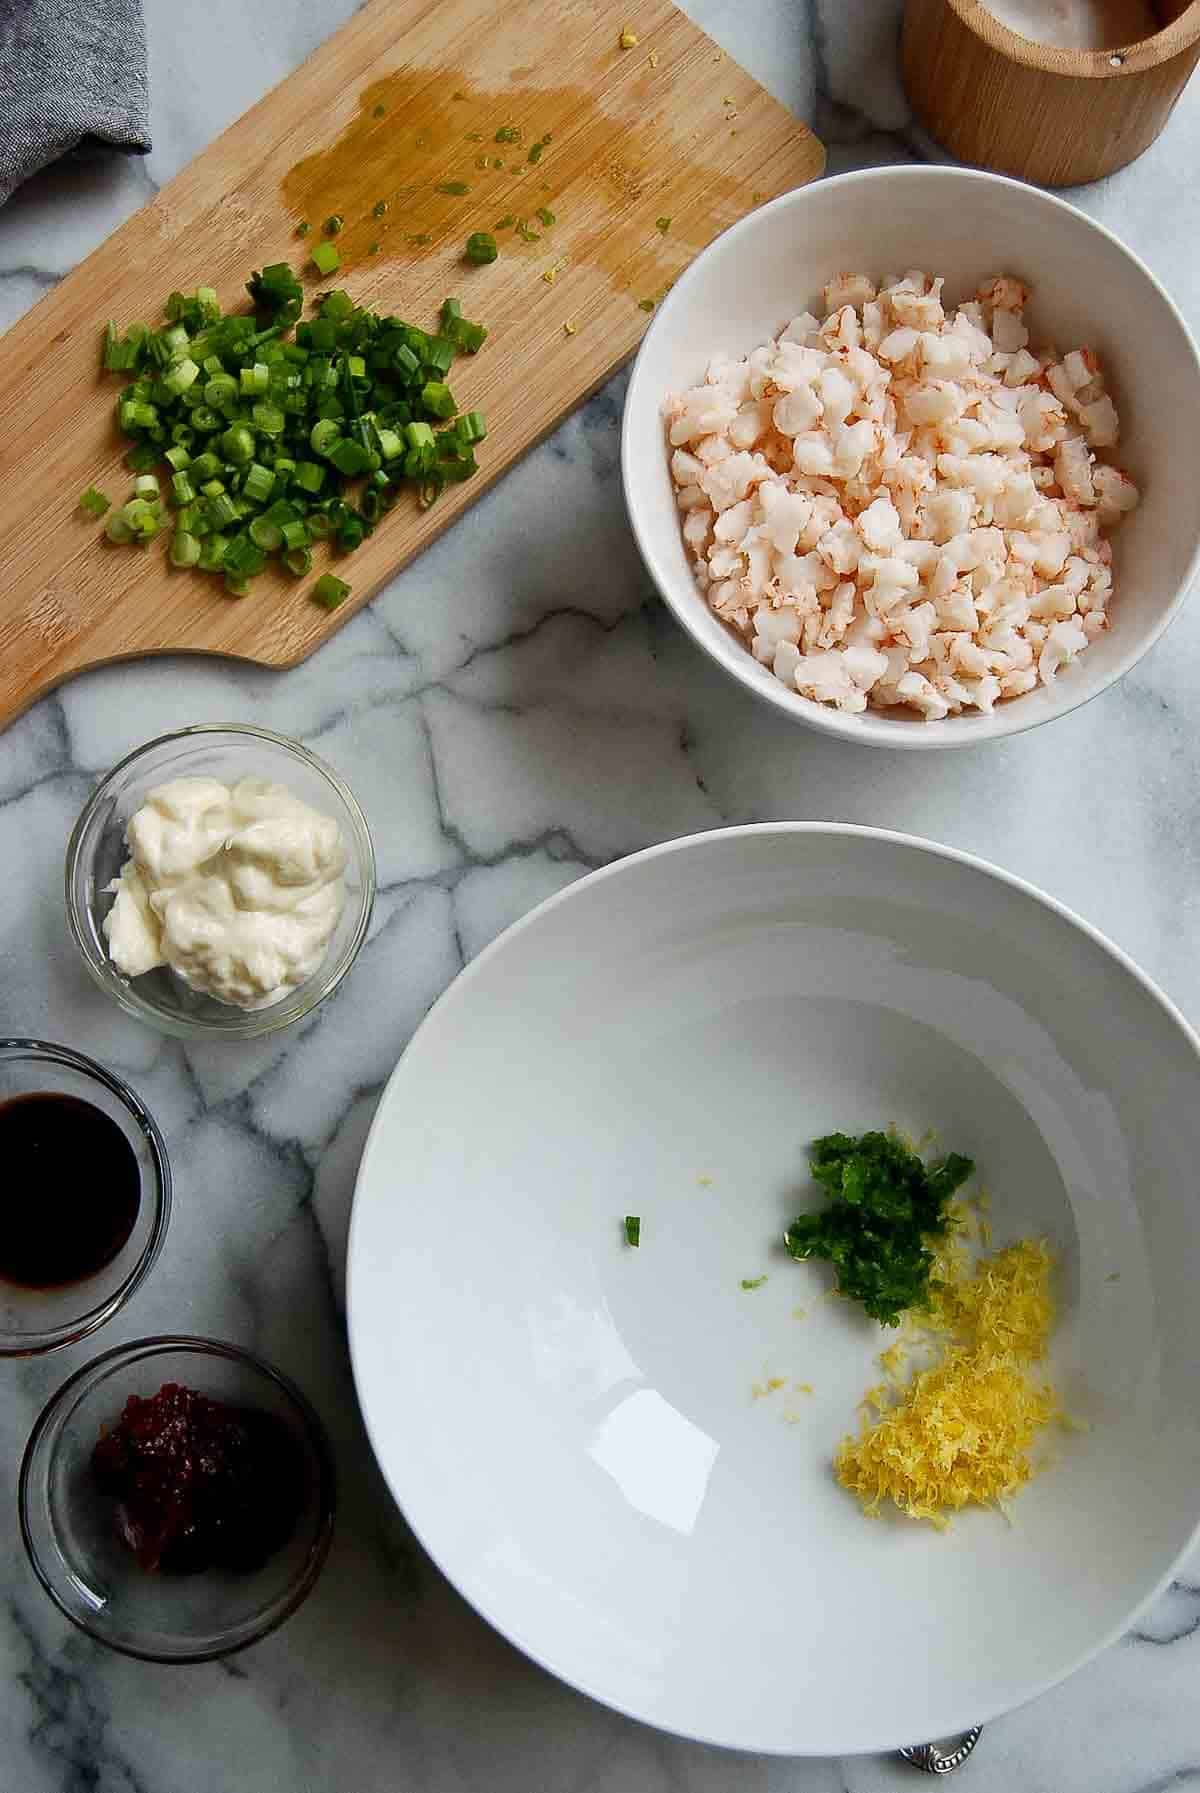 spicy shrimp salad ingredients on countertop with lemon zest and grated jalapeno in bowl.